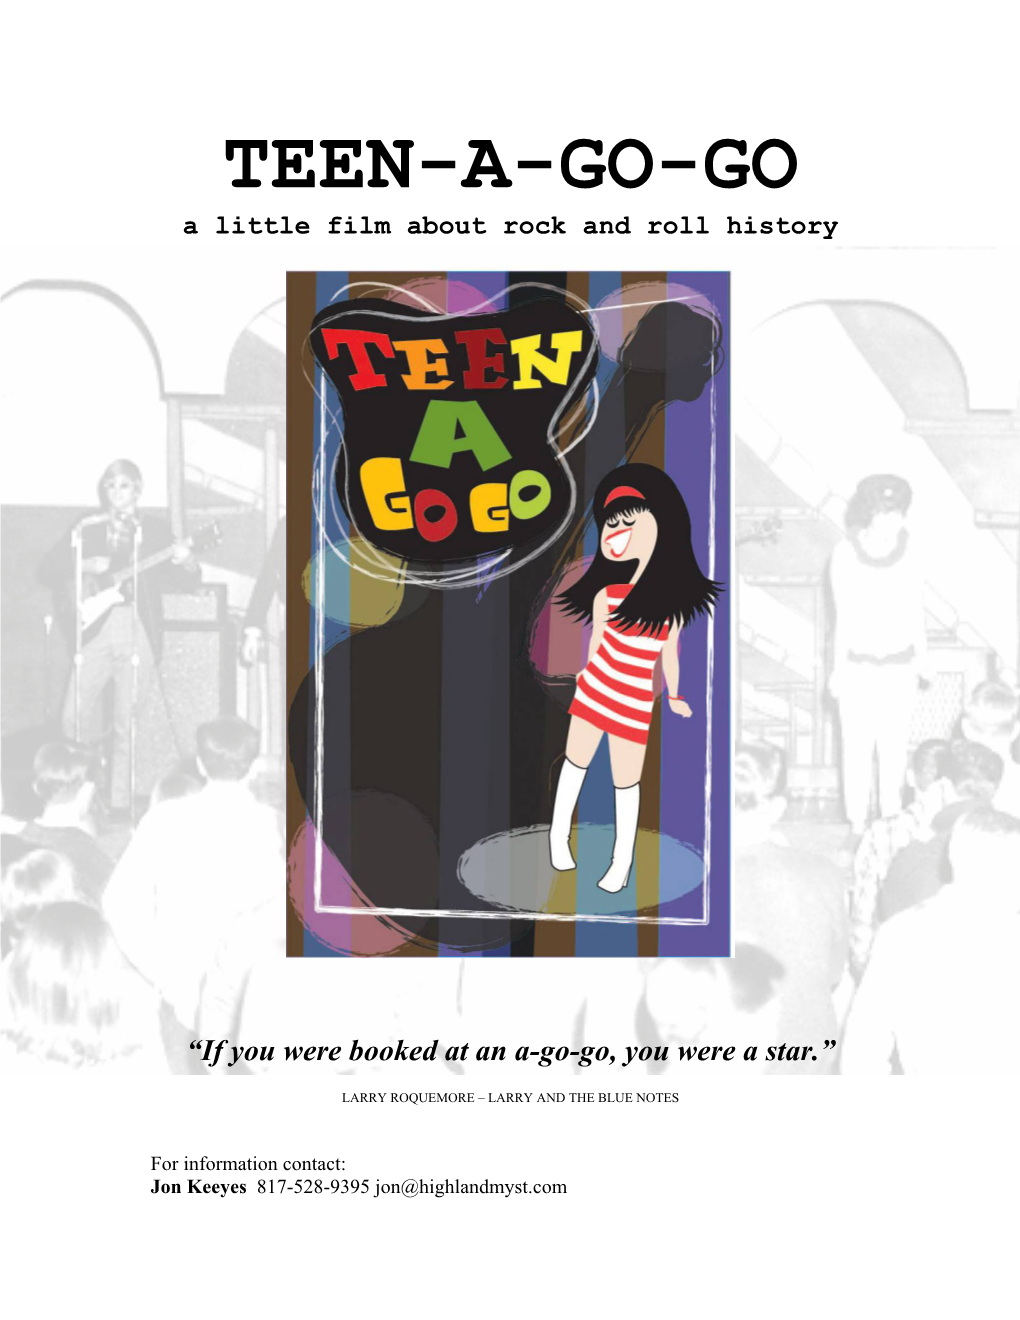 TEEN-A-GO-GO a Little Film About Rock and Roll History